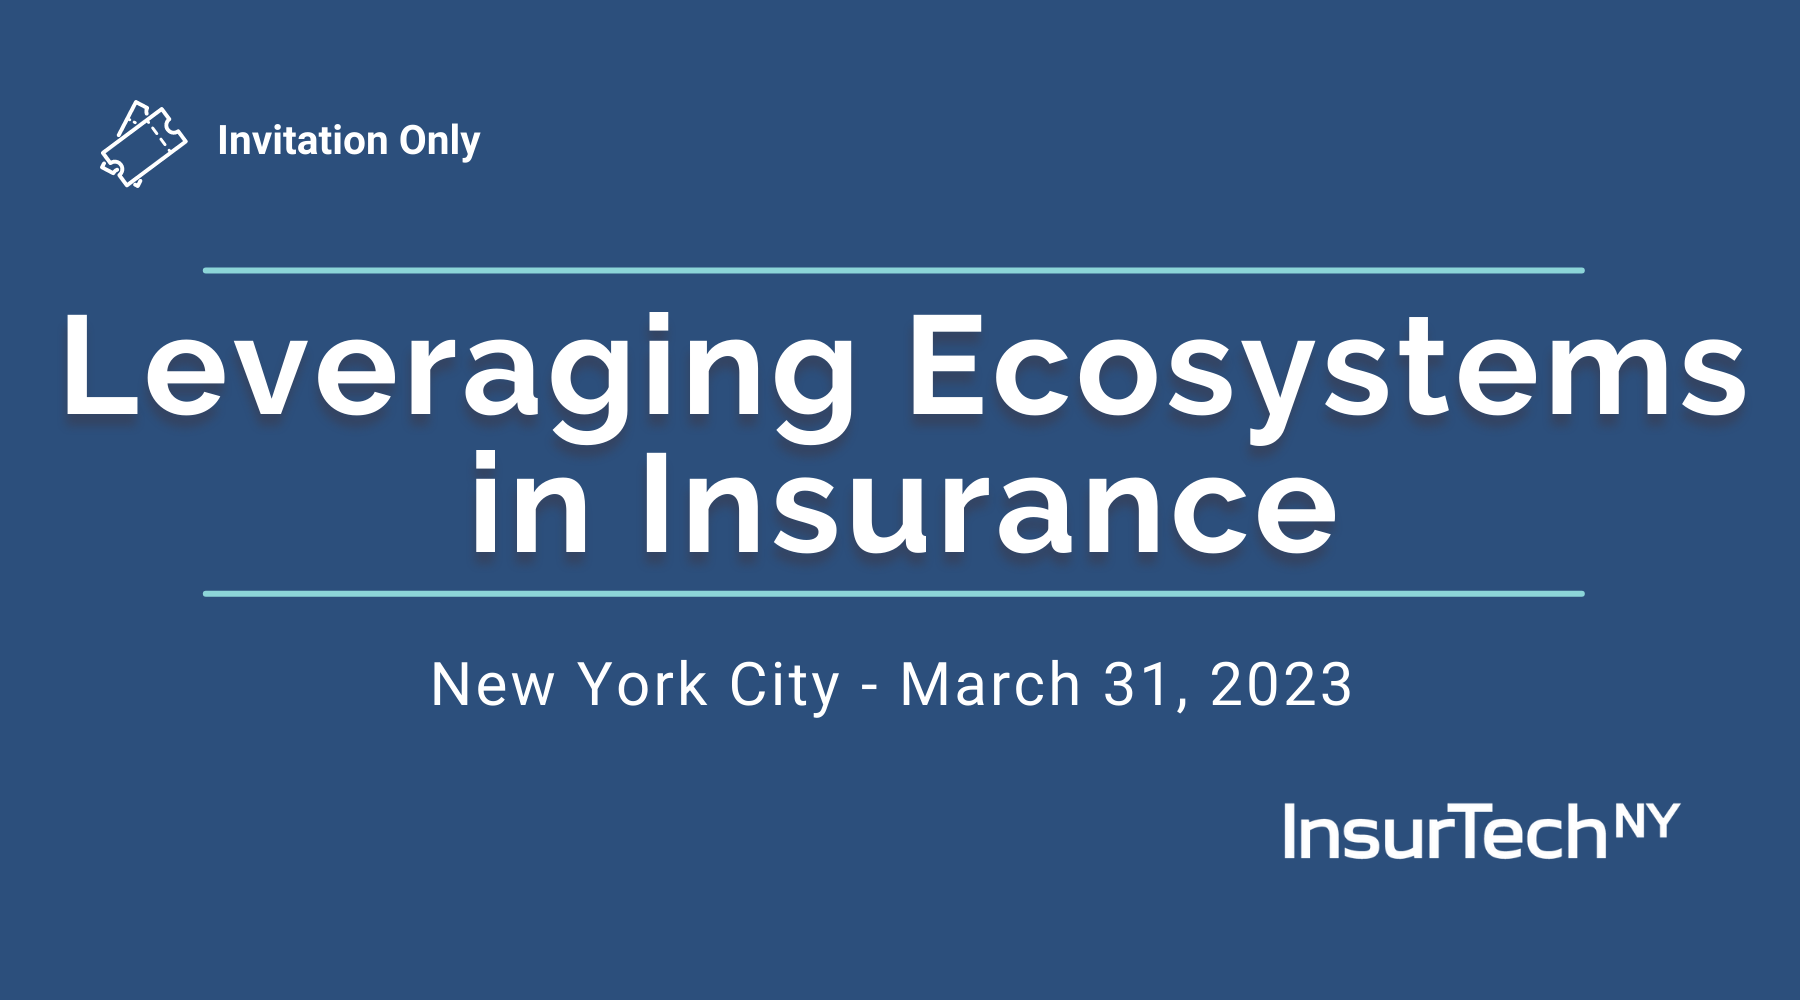 Leveraging Ecosystems in Insurance